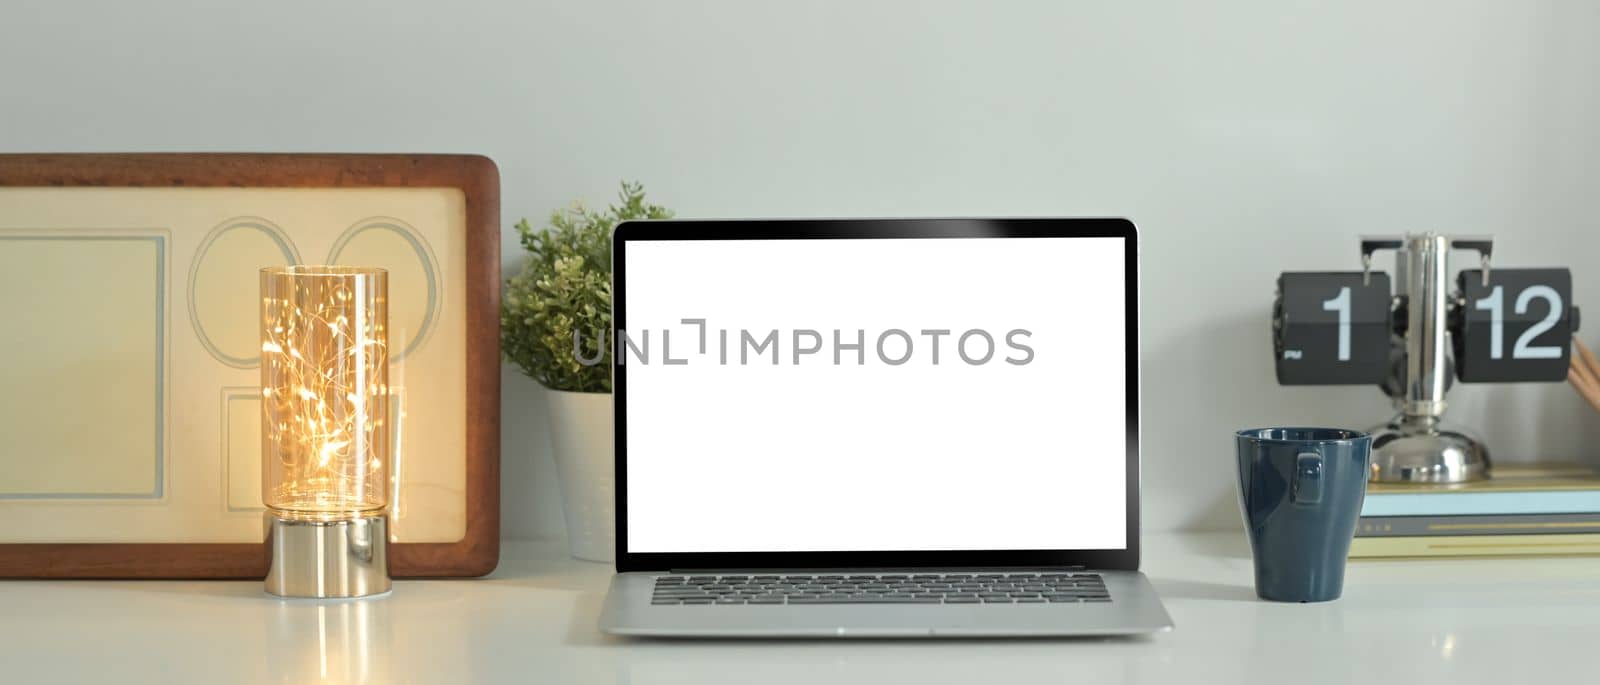 Laptop computer, coffee cup, picture frame and potted plant on white table. Blank screen for text information or content.